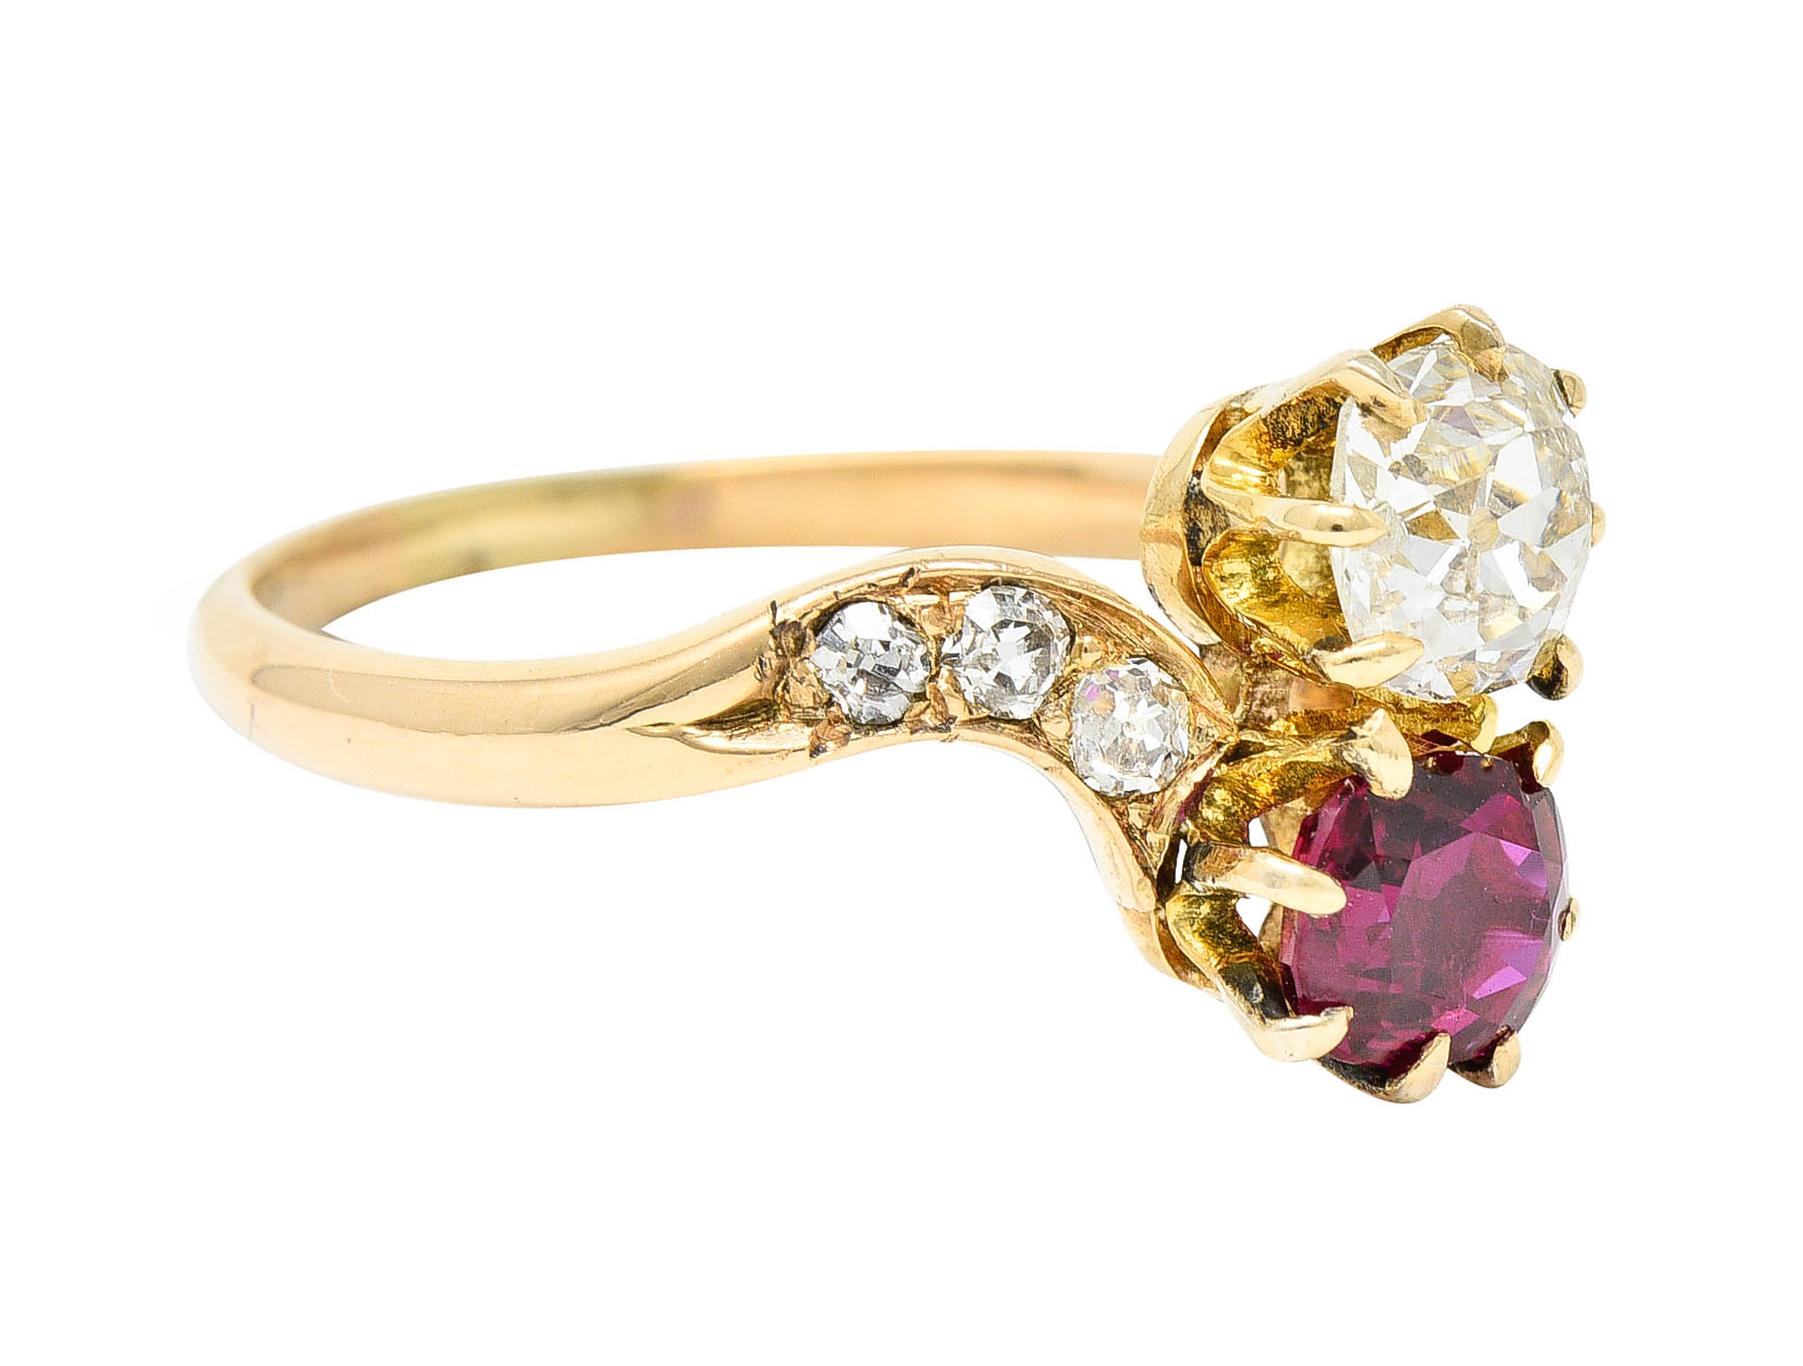 Bypass style ring featuring a double stone motif is the Toi et Moi style - French to mean 'You and Me'

With an old mine cut diamond weighing approximately 0.55 carat with K color and SI2 clarity

With a cushion cut ruby weighing approximately 0.50